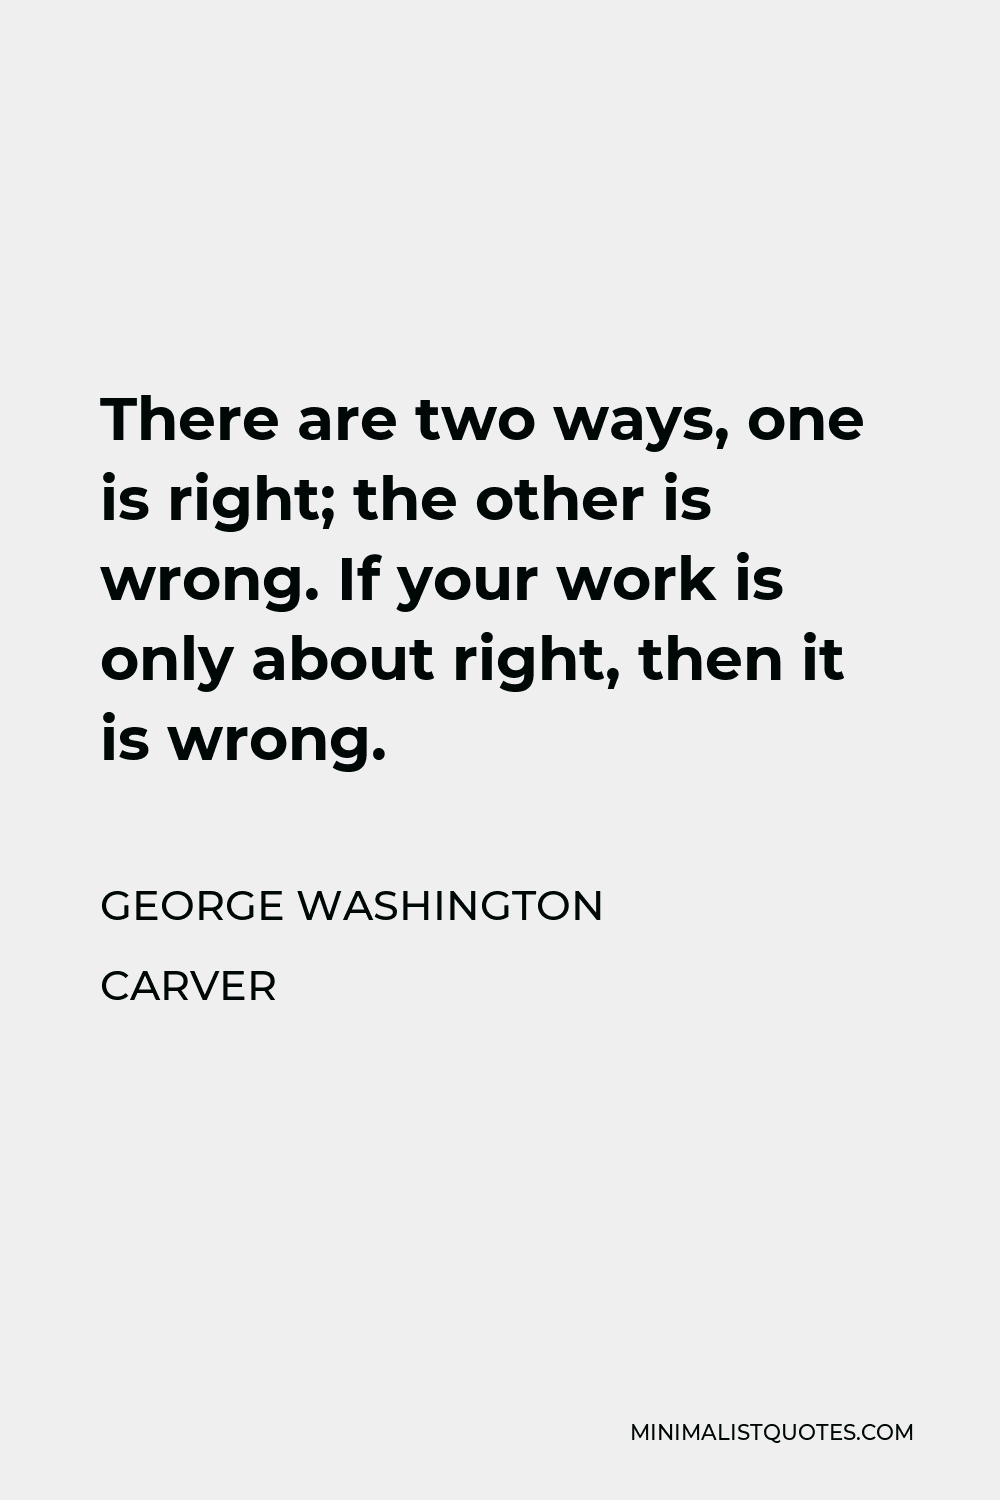 George Washington Carver Quote - There are two ways, one is right; the other is wrong. If your work is only about right, then it is wrong.